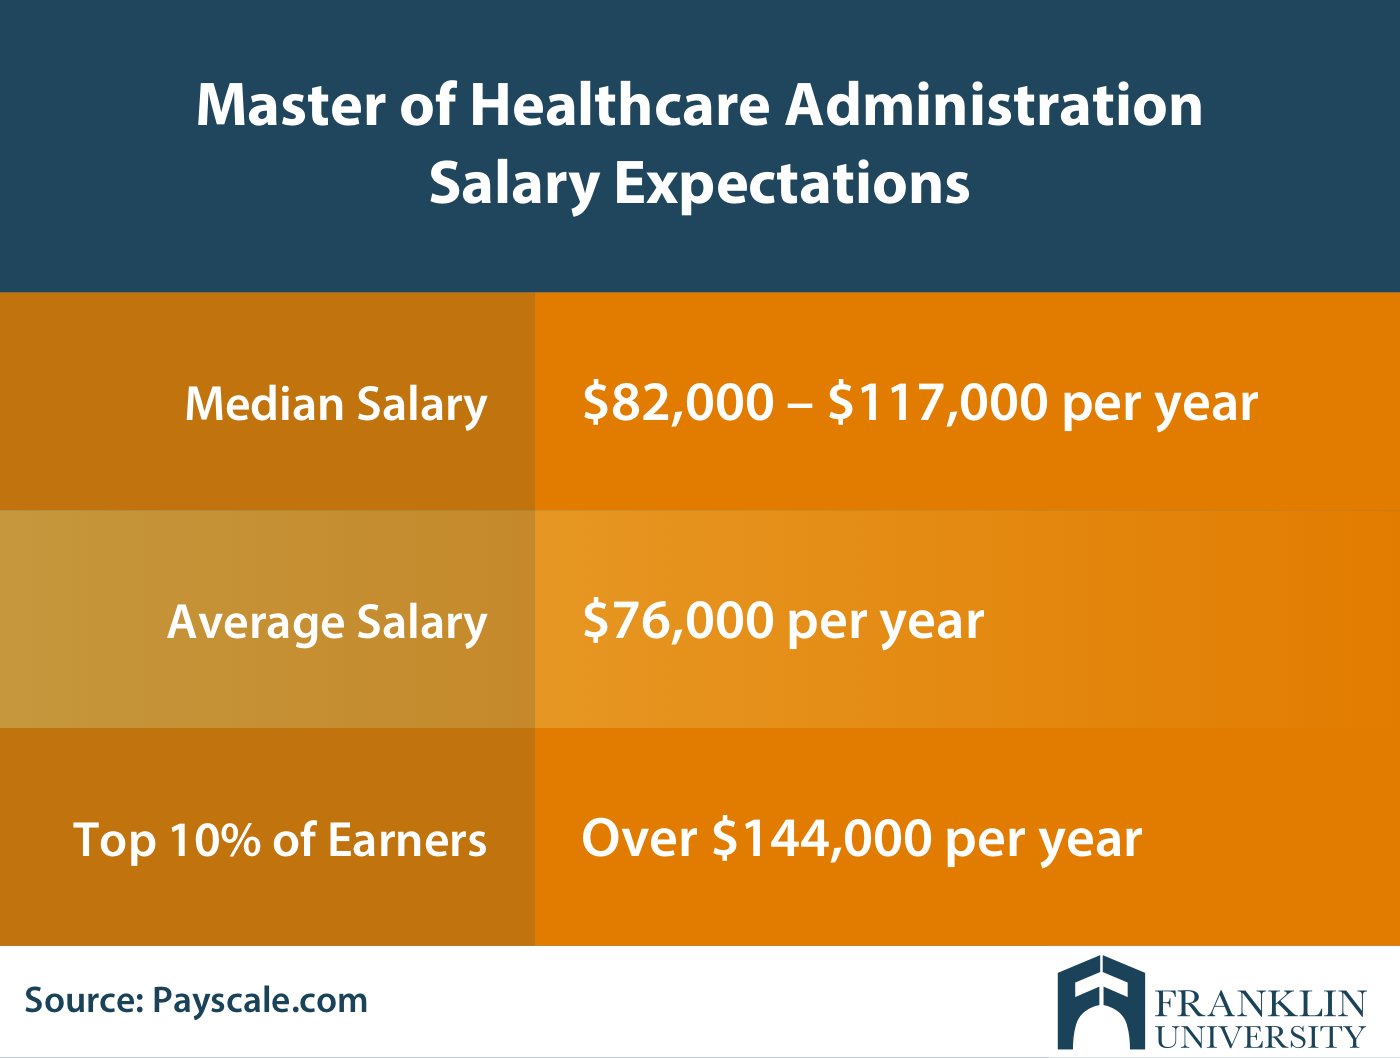 graphic describing the master of healthcare administration salary expectations